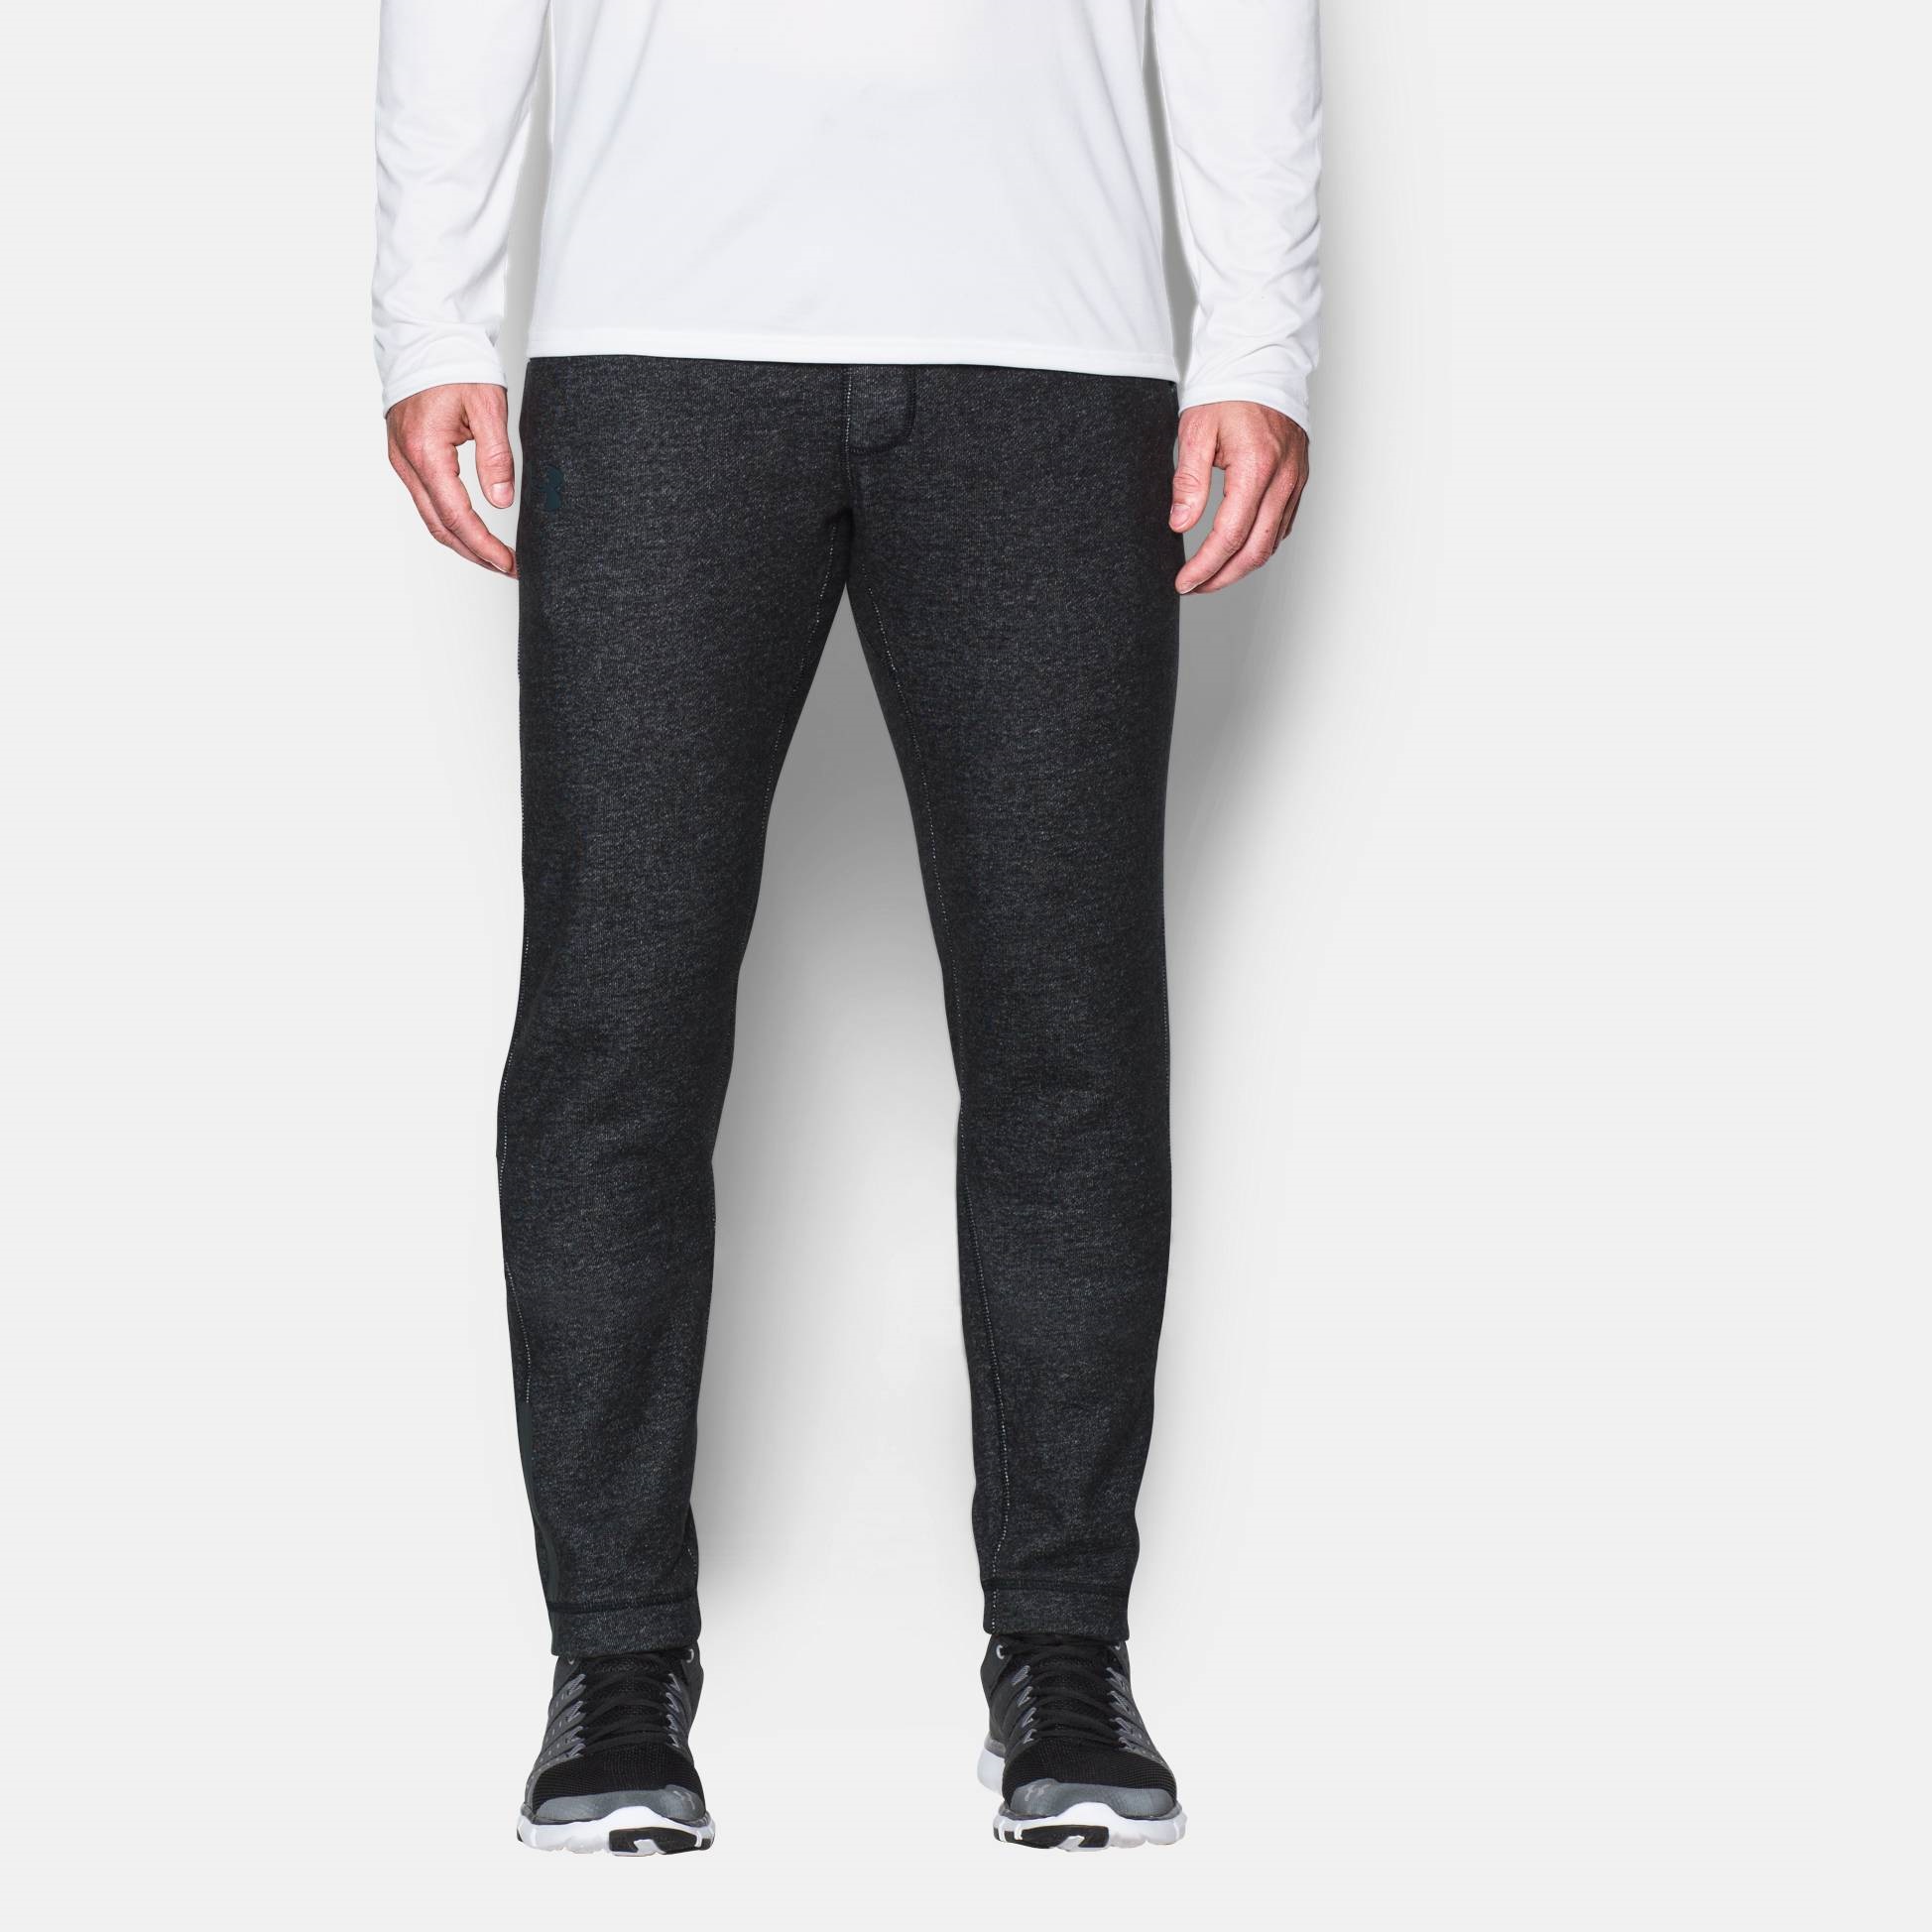  -  under armour Varsity Tapered Pants